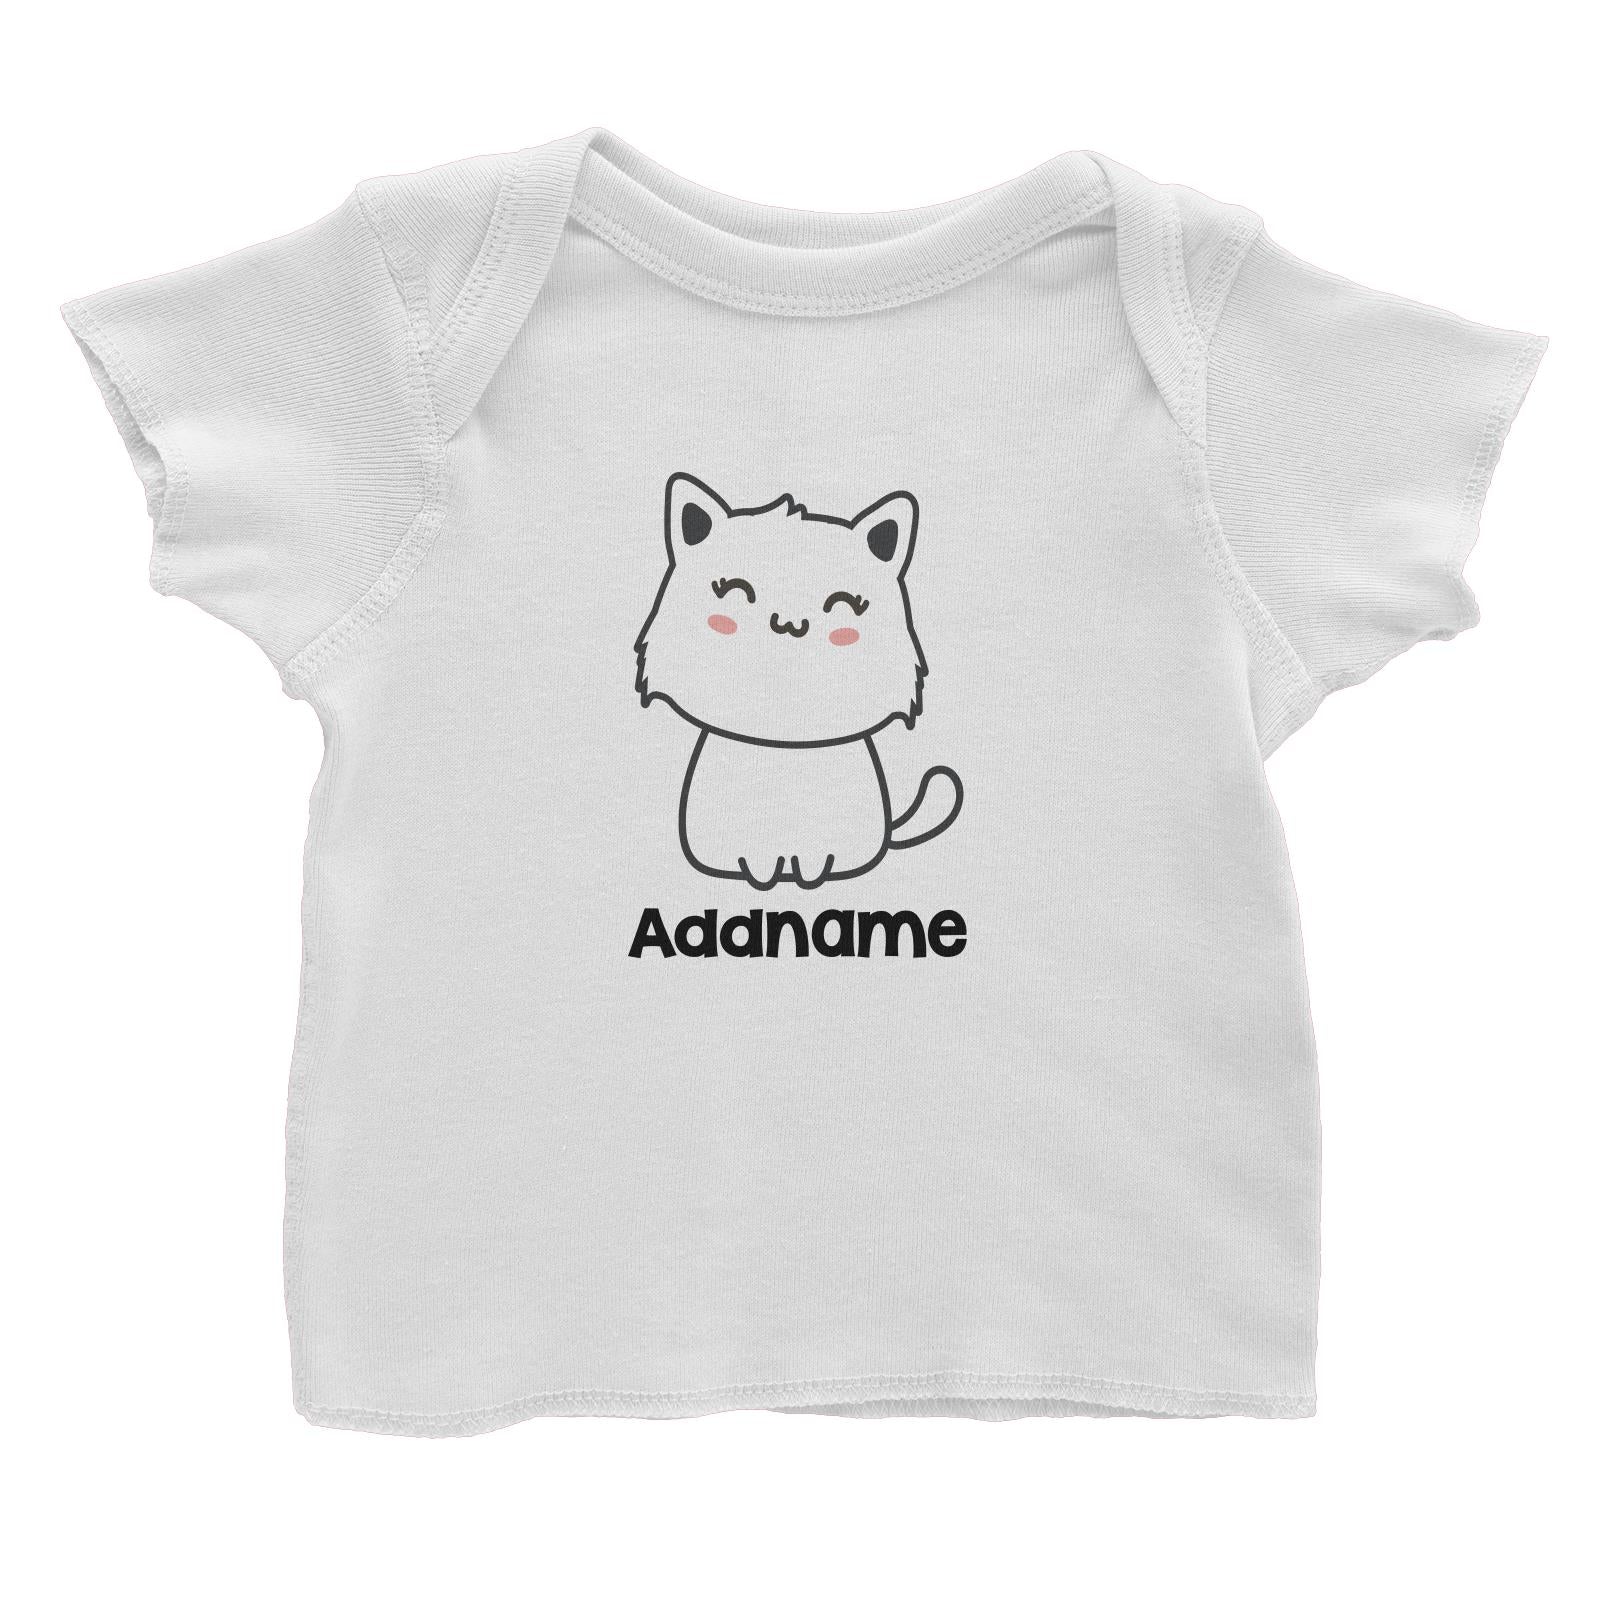 Drawn Adorable Cats White Addname Baby T-Shirt